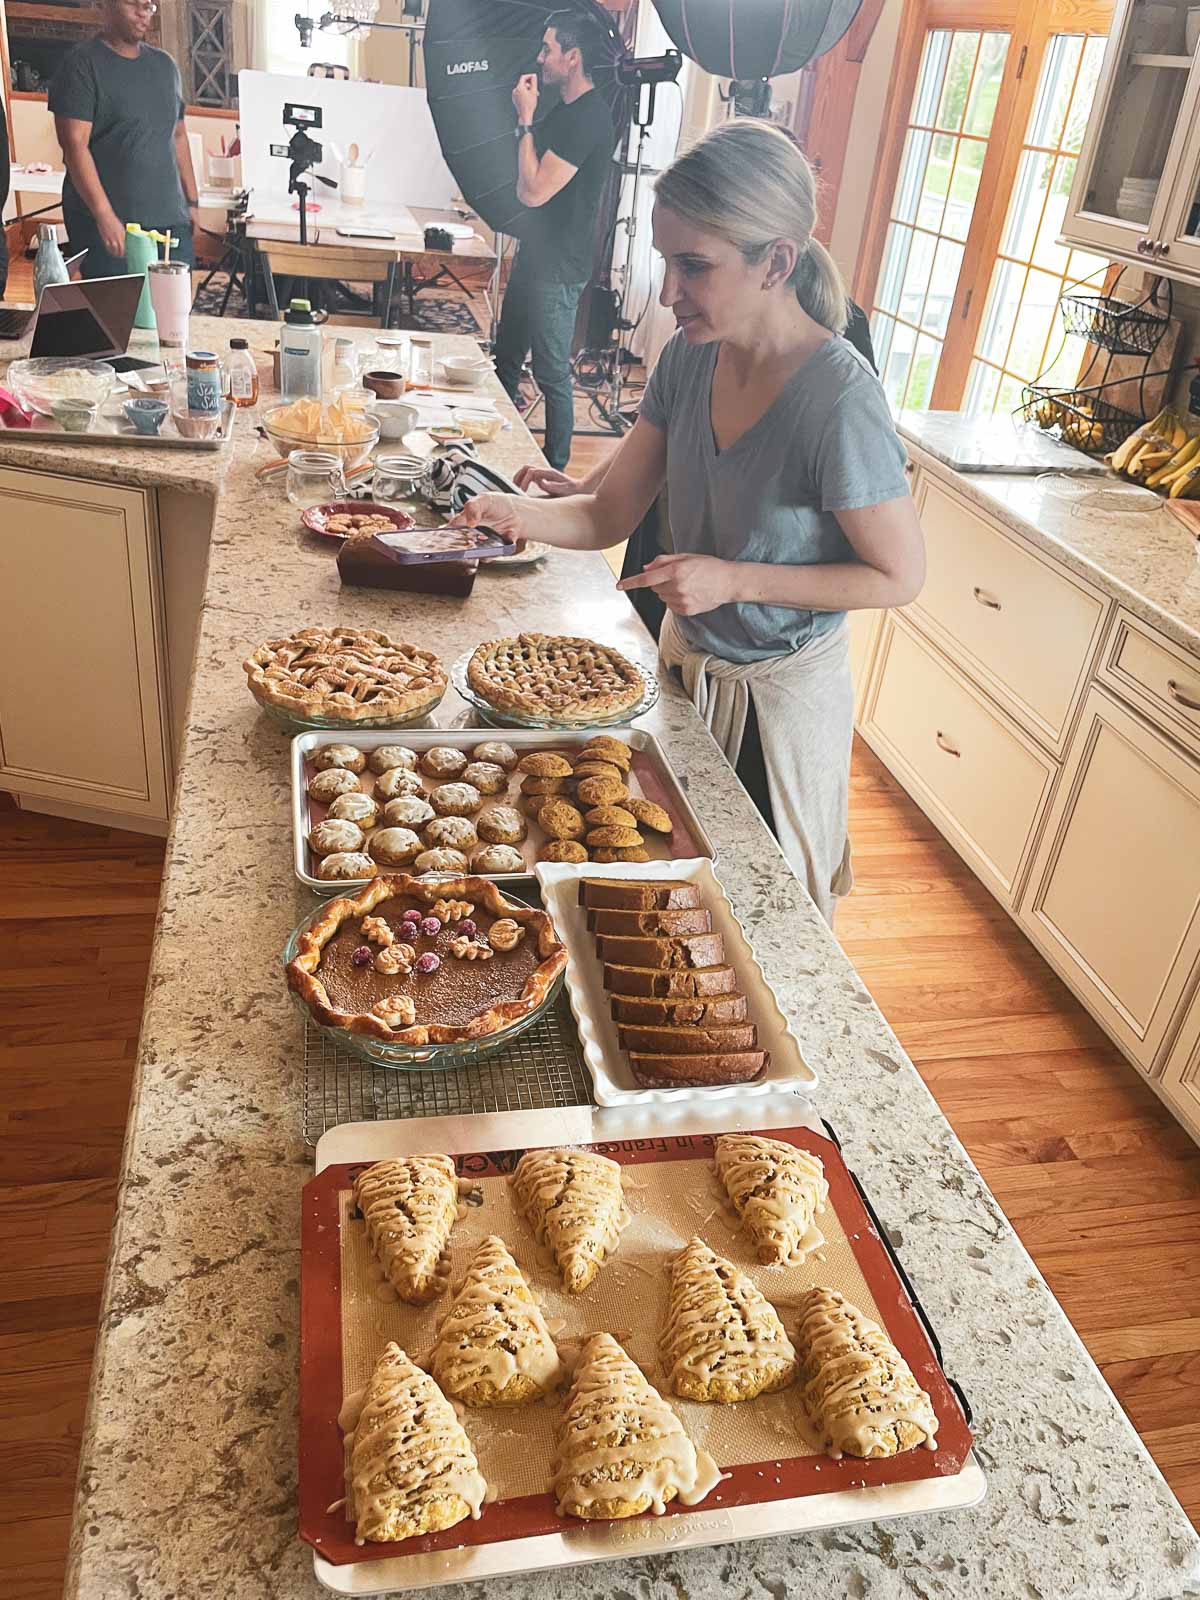 Sally with fall and holiday baked goods on counter including pumpkin pie, pumpkin bread, and cookies.